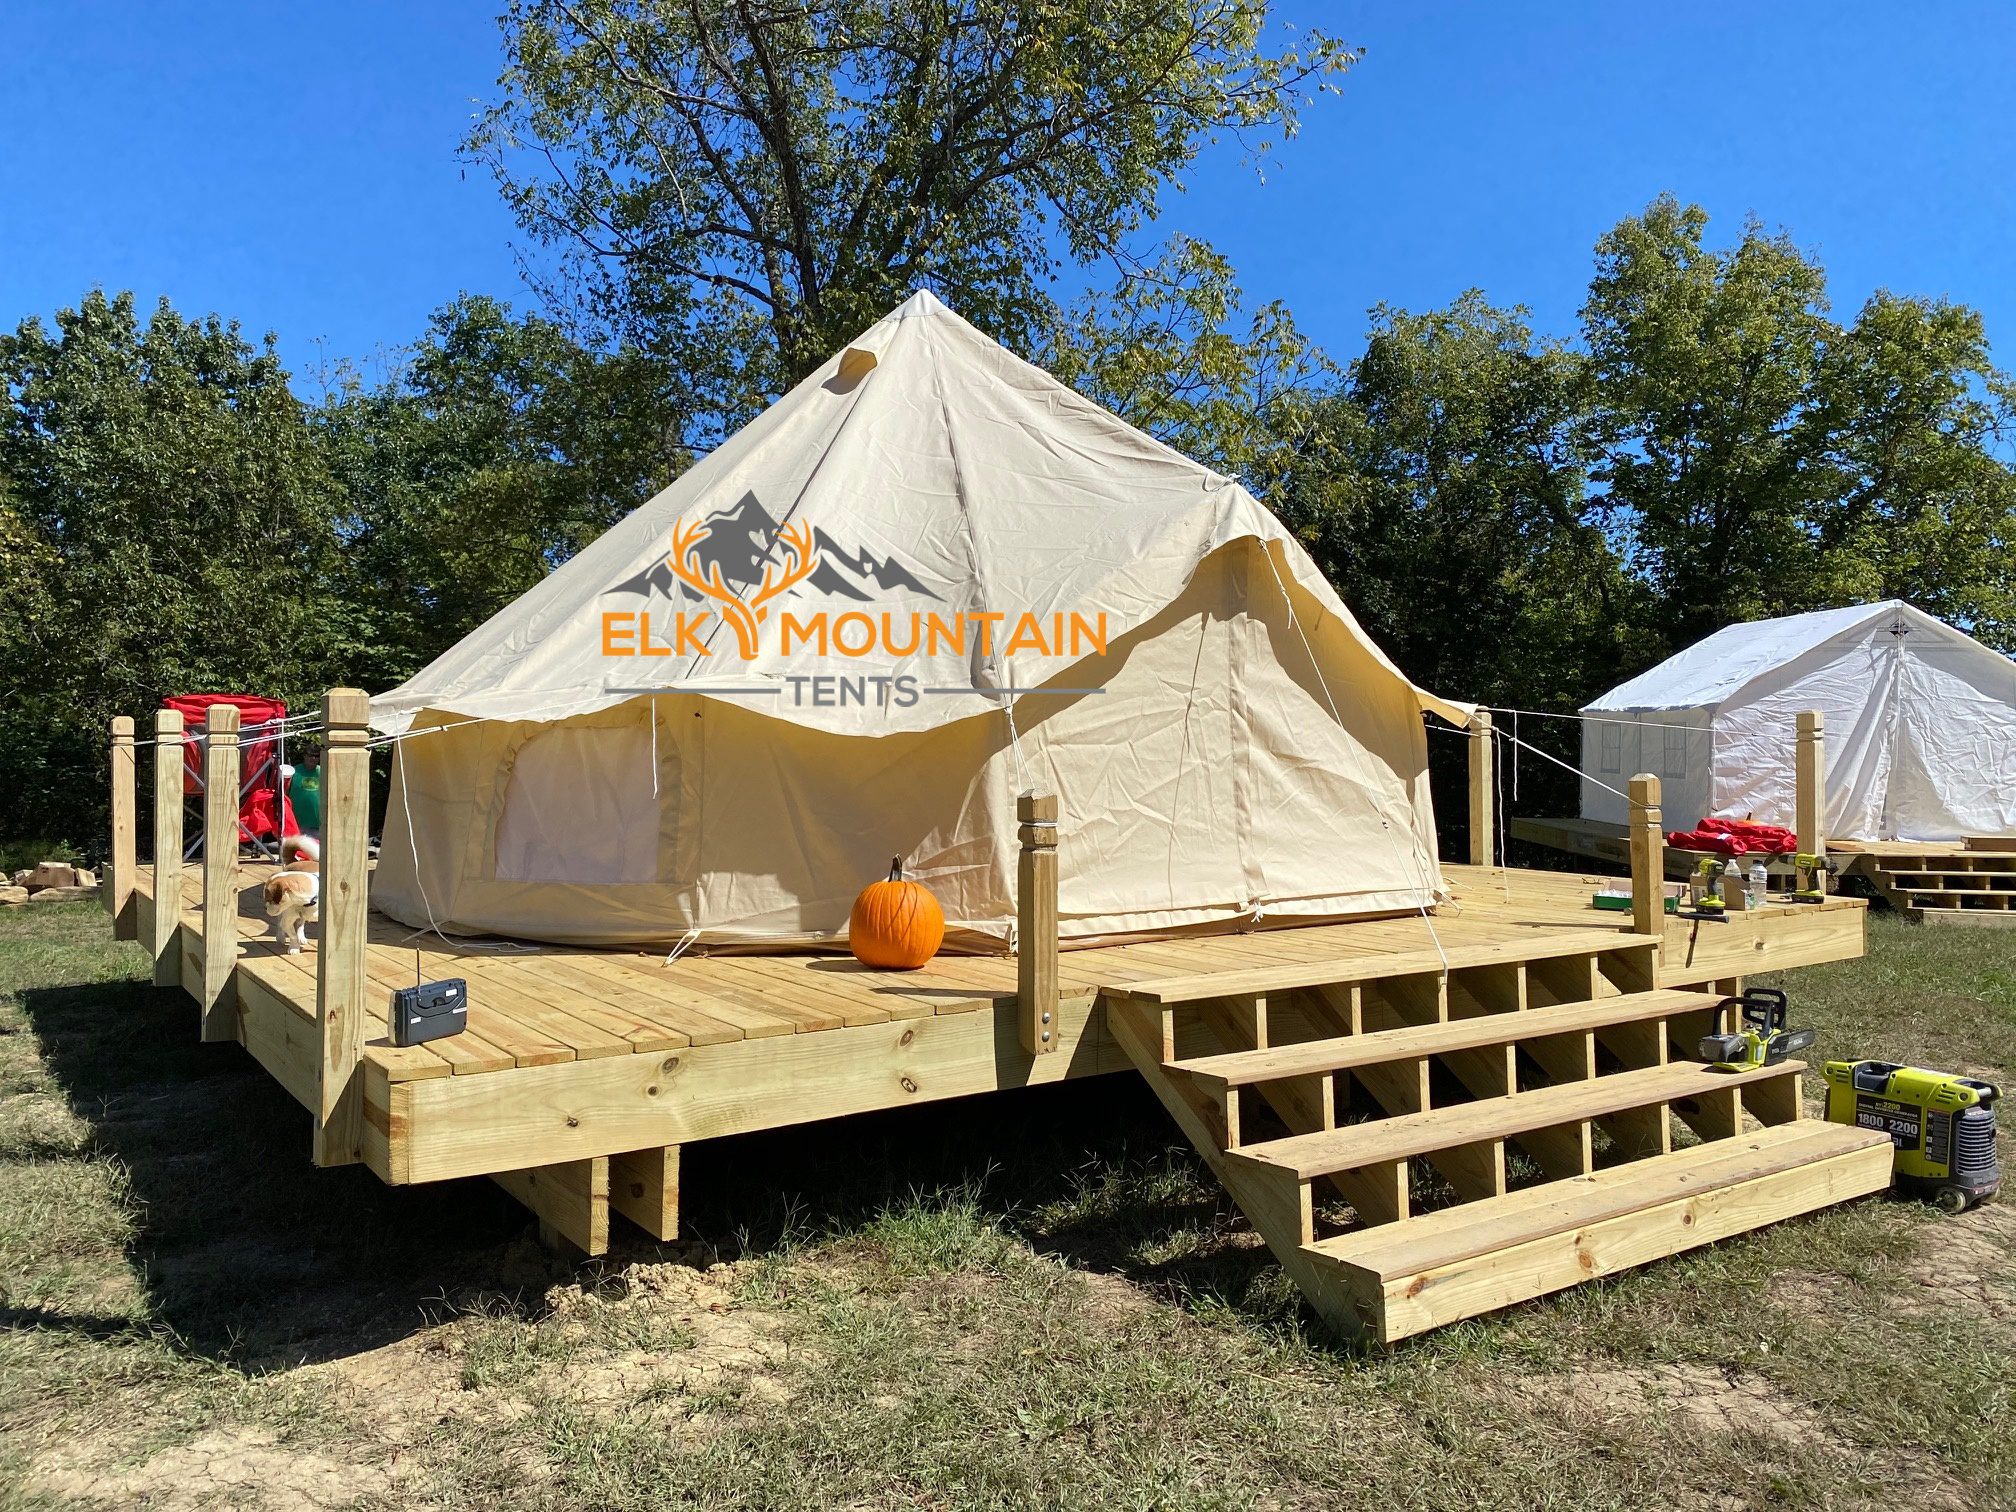 cabela's canvas tent 4 season tent with stove jack canvas a frame tent living in a tent full time 4 season tent with stove canvas wall tents for sale tents you can live in